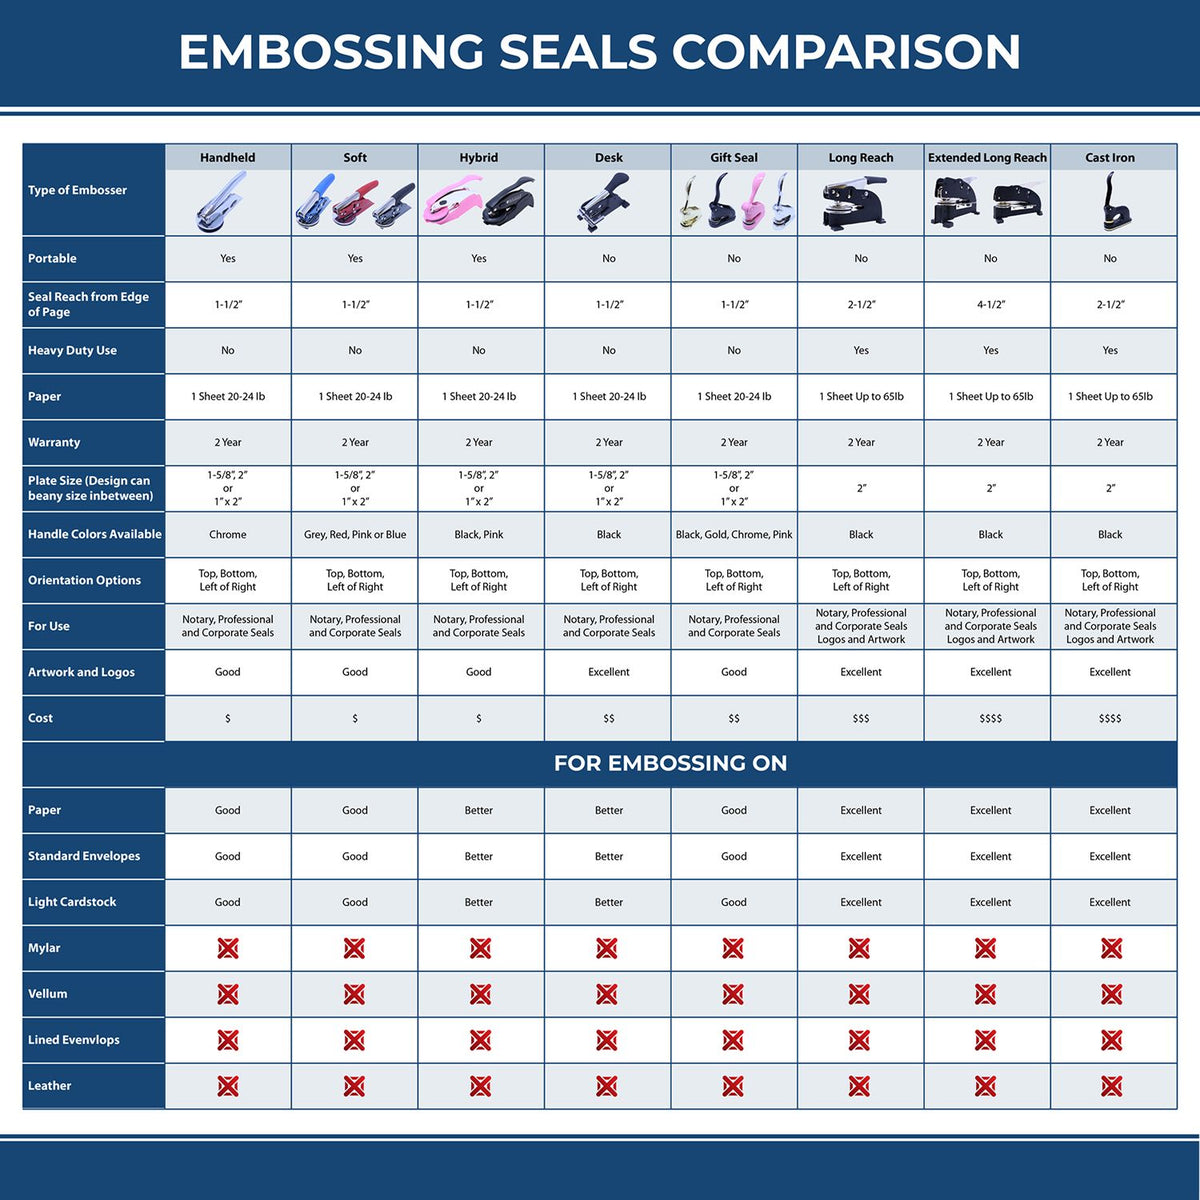 A comparison chart for the different types of mount models available for the Gift Maryland Geologist Seal